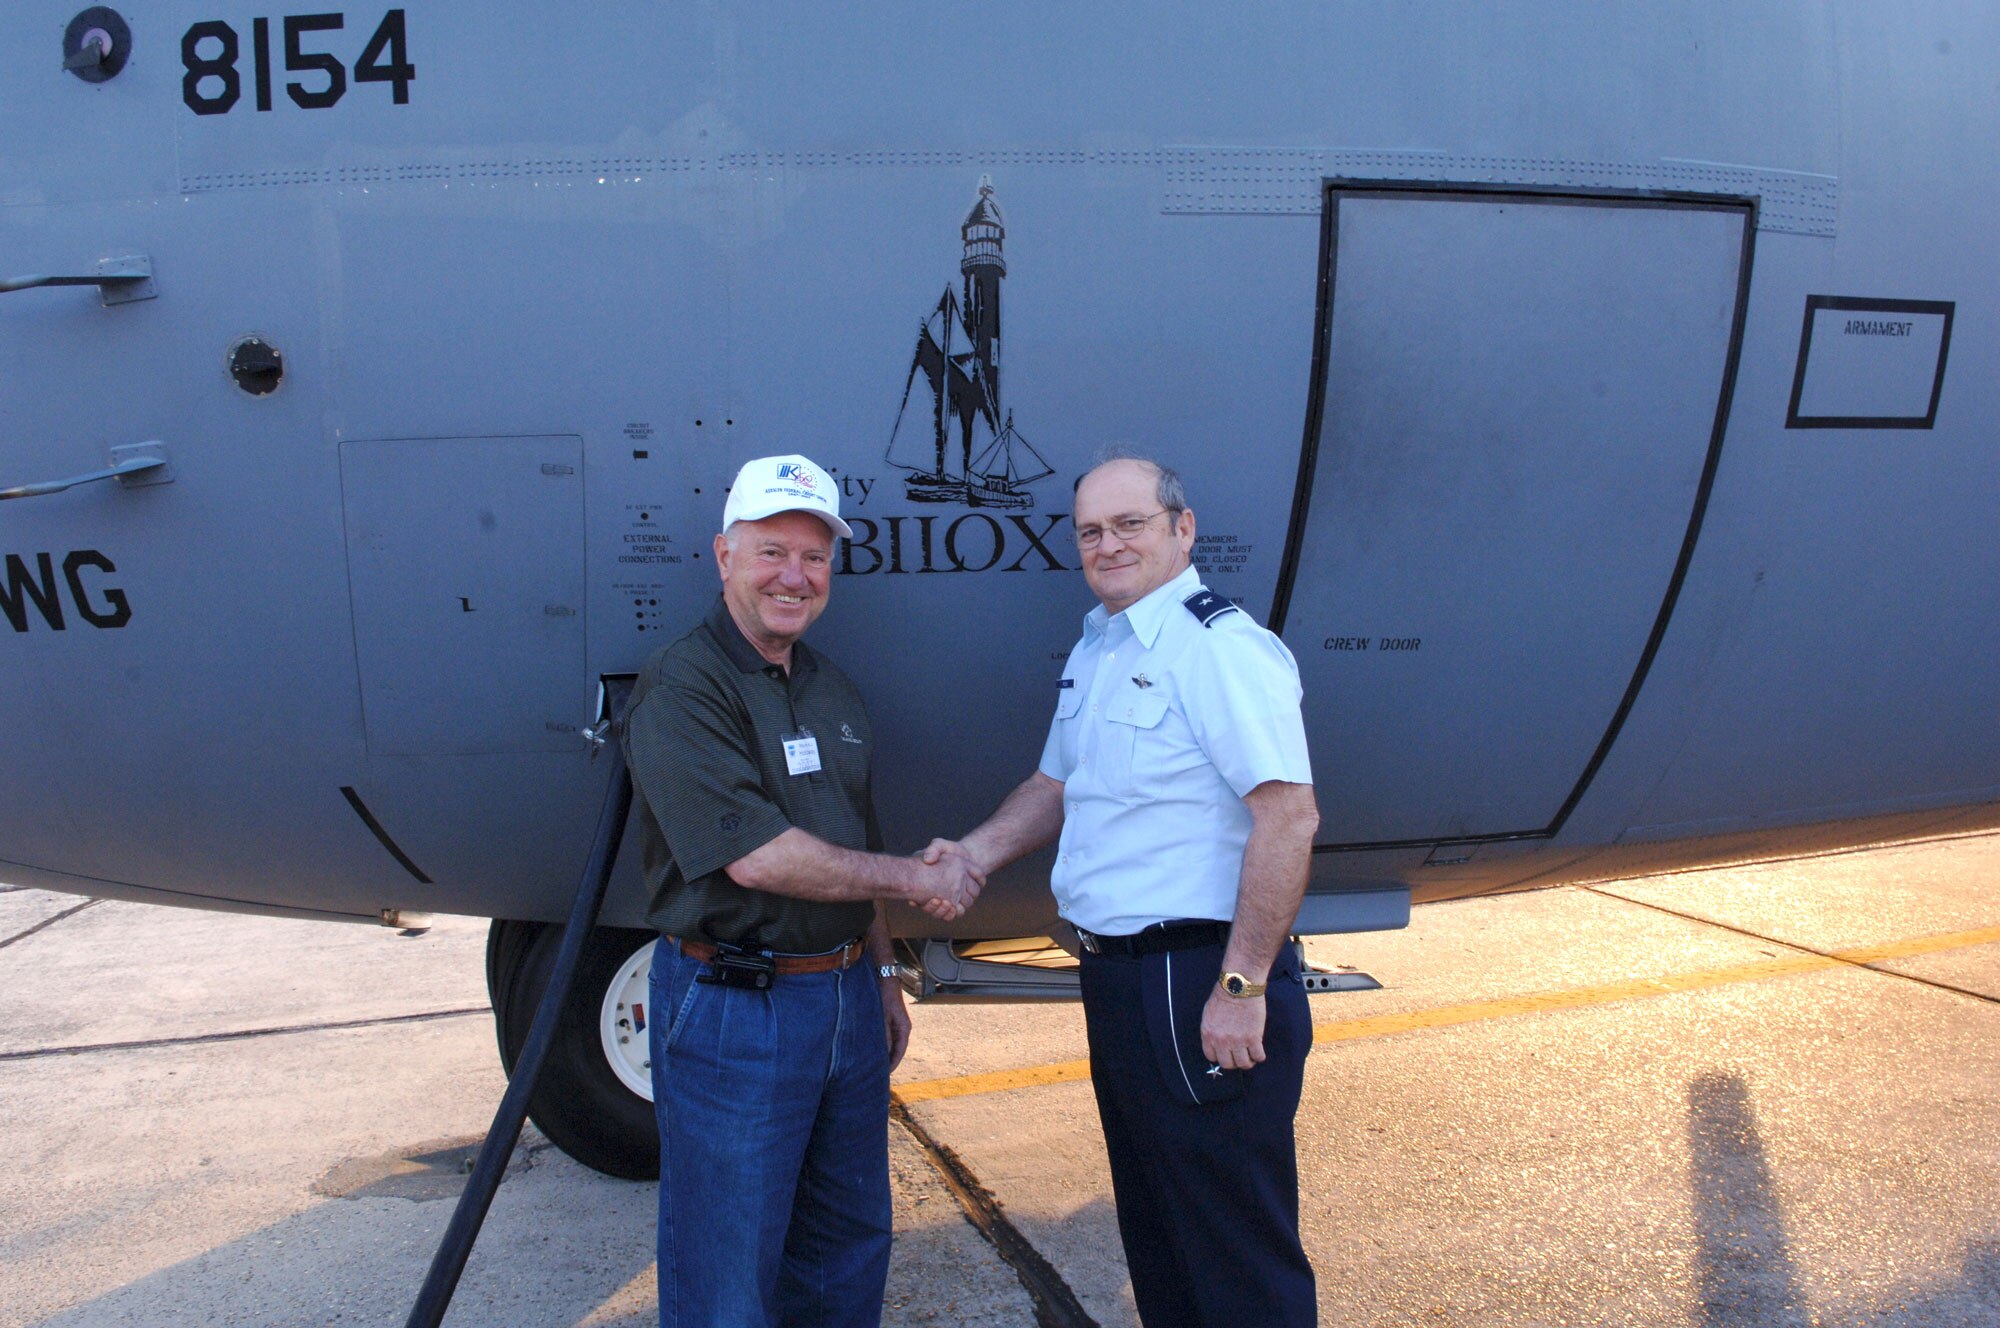 KEESLER AIR FORCE BASE, Miss. -- Biloxi Mayor, A.J. Holloway, shakes hands with Brig. Gen. Rich Moss, commander, 403rd Wing after a two-day civic leader tour aboard the C-130J-30 aircraft named the "Spirit of Biloxi." The Civic Leader Tour is an annual event that showcases the many missions and capabilities of the Air Force Reserve. This was Holloway's first flight aboard the aircraft named for his city. (U.S. Air Force Photo/Tech. Sgt. James B. Pritchett)